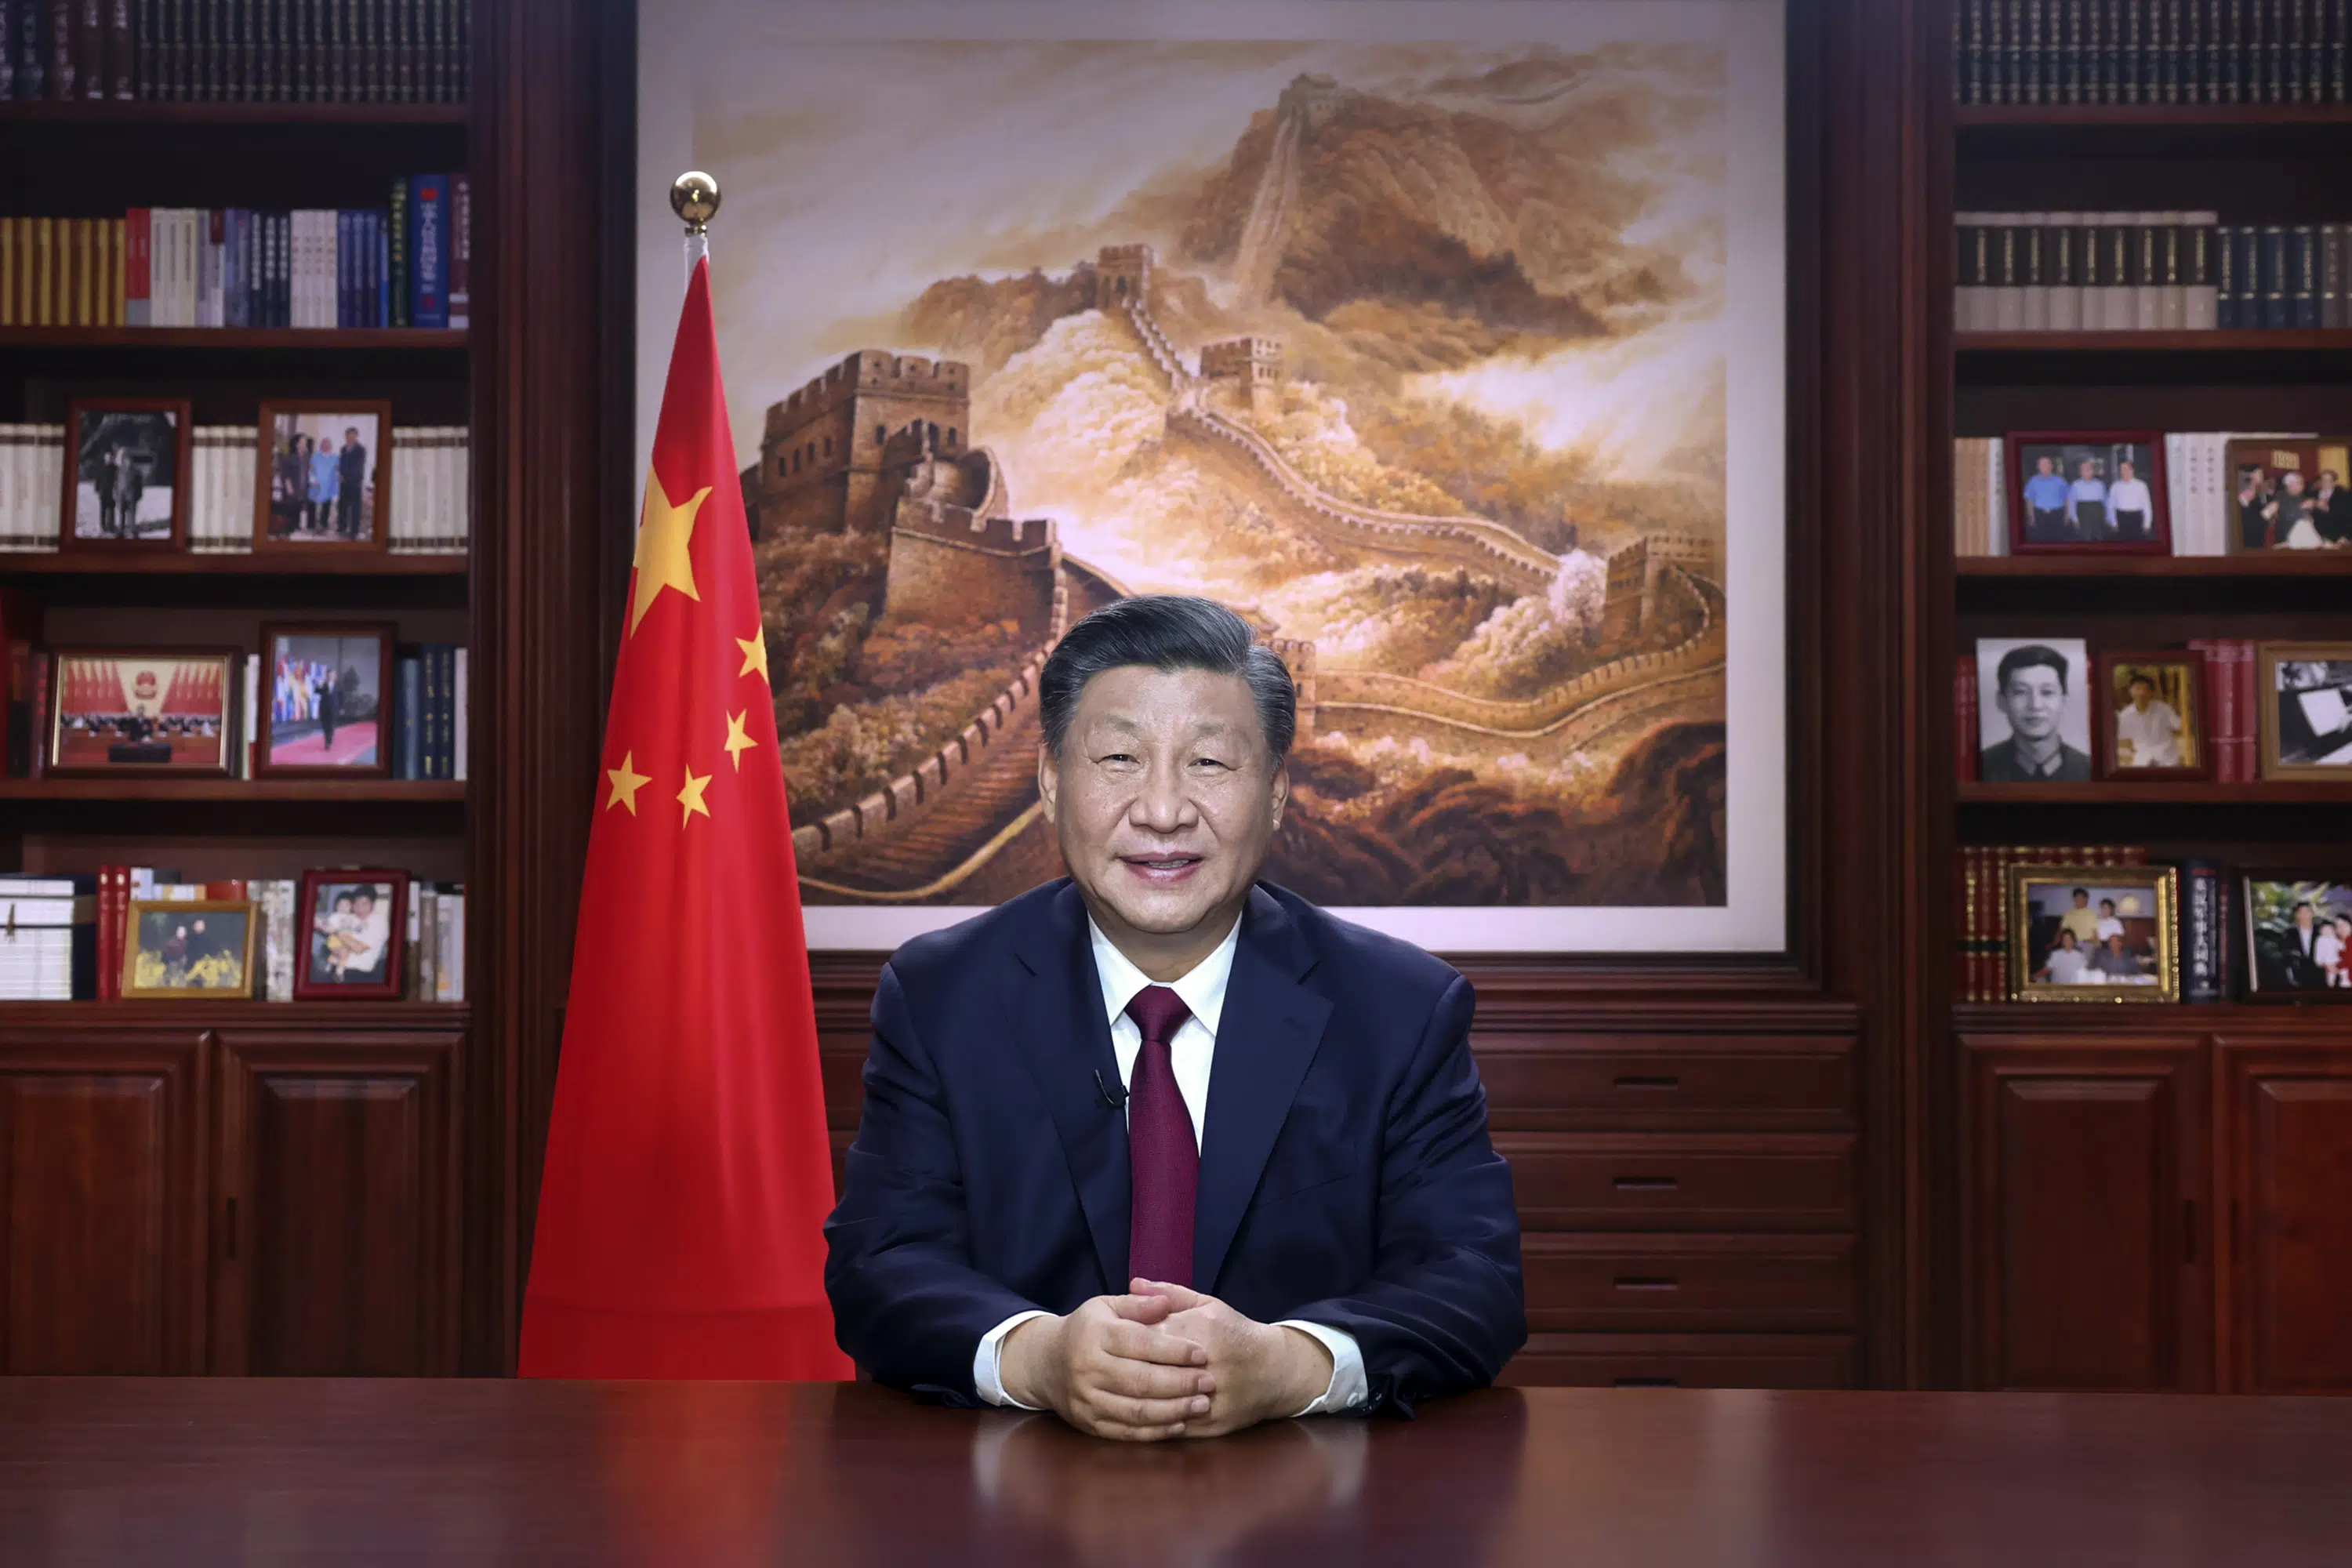 Troubles aside, Xi says China on ‘right side of history’